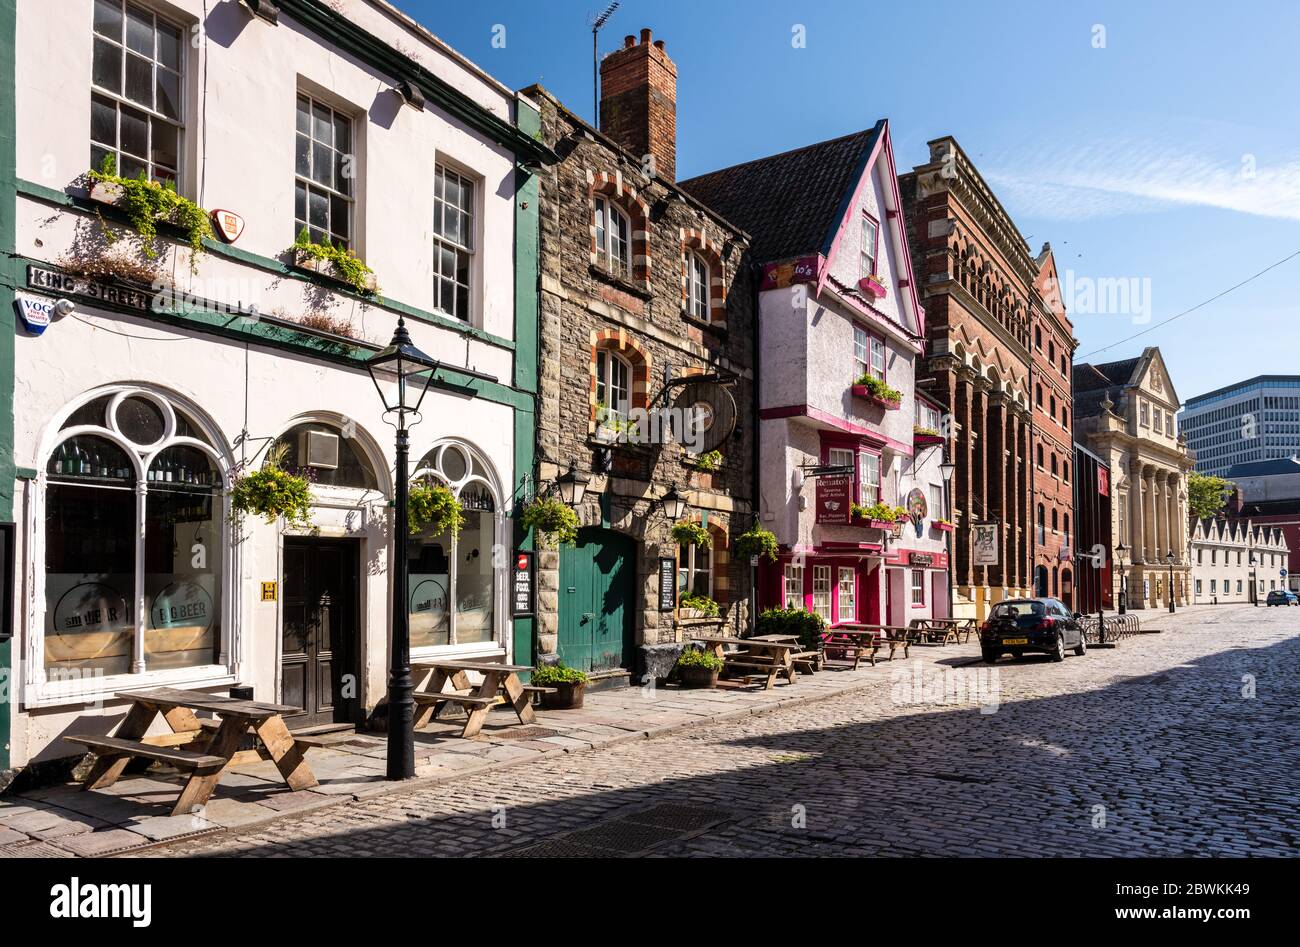 Bristol, England, UK - May 25, 2020: Morning sun shines on pubs and resturants decorated with hanging baskets and window boxes on Bristol's historic c Stock Photo